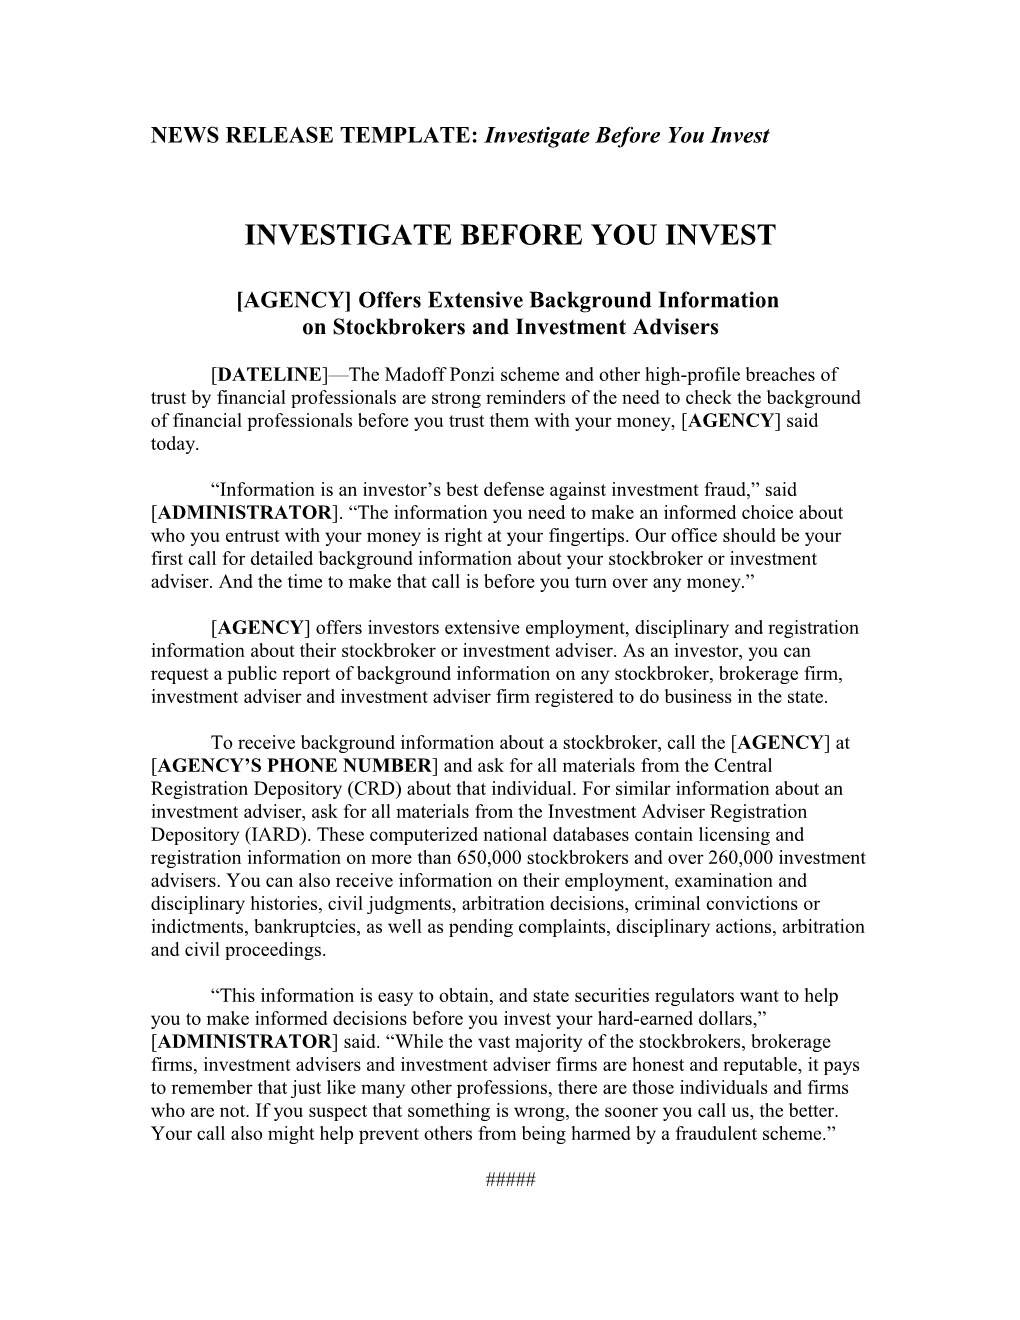 NEWS RELEASE TEMPLATE: Investigate Before You Invest